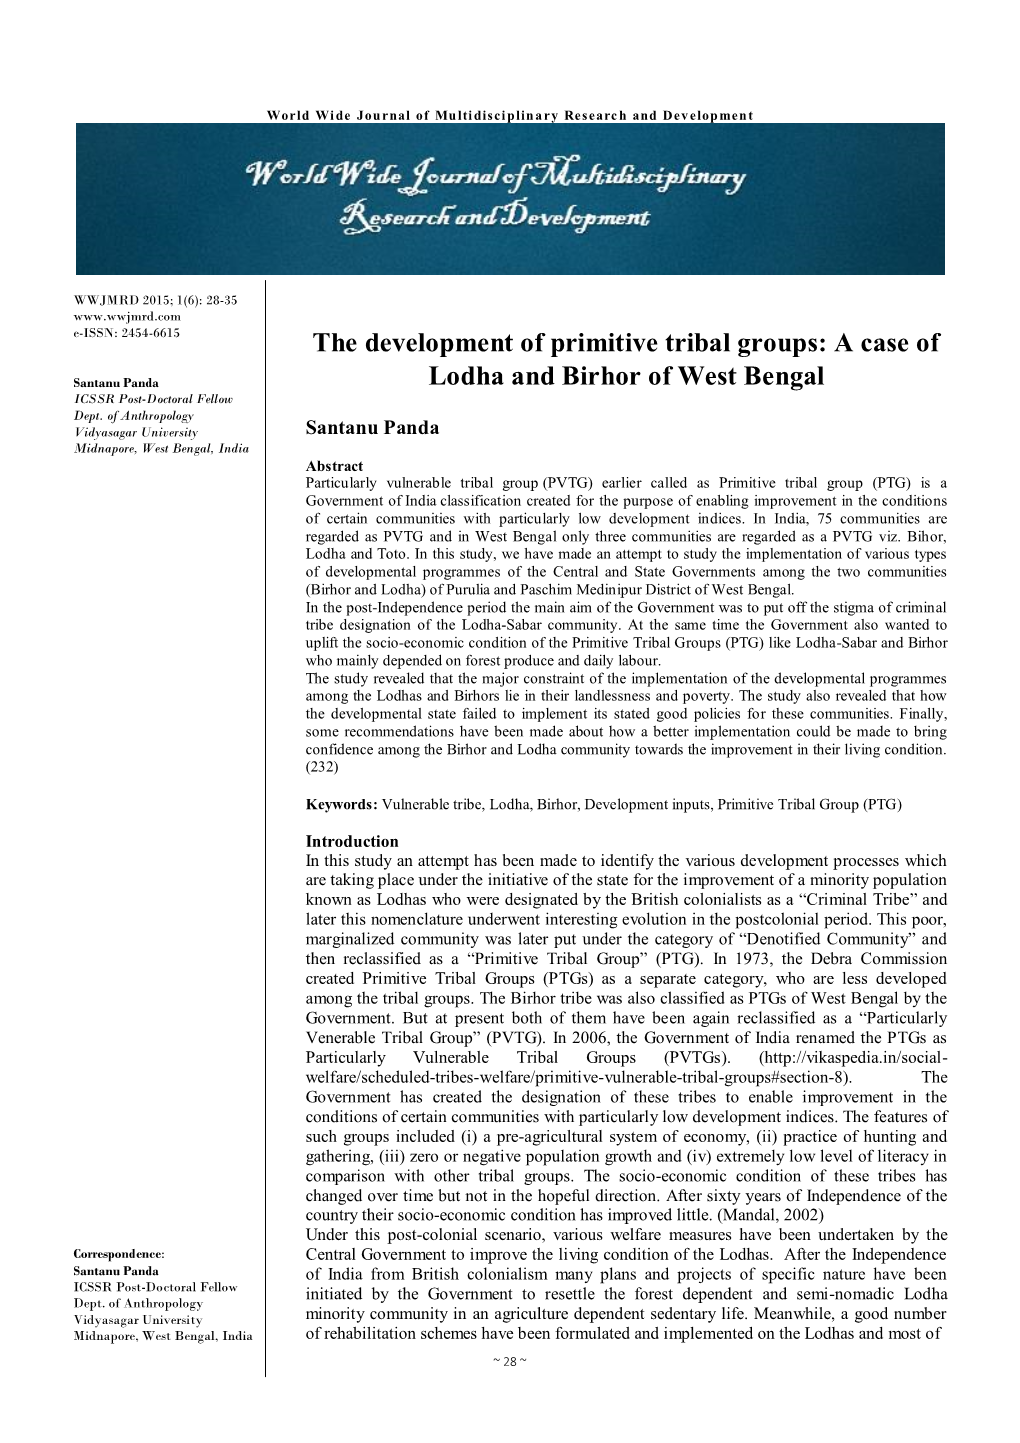 The Development of Primitive Tribal Groups: a Case of Lodha and Birhor